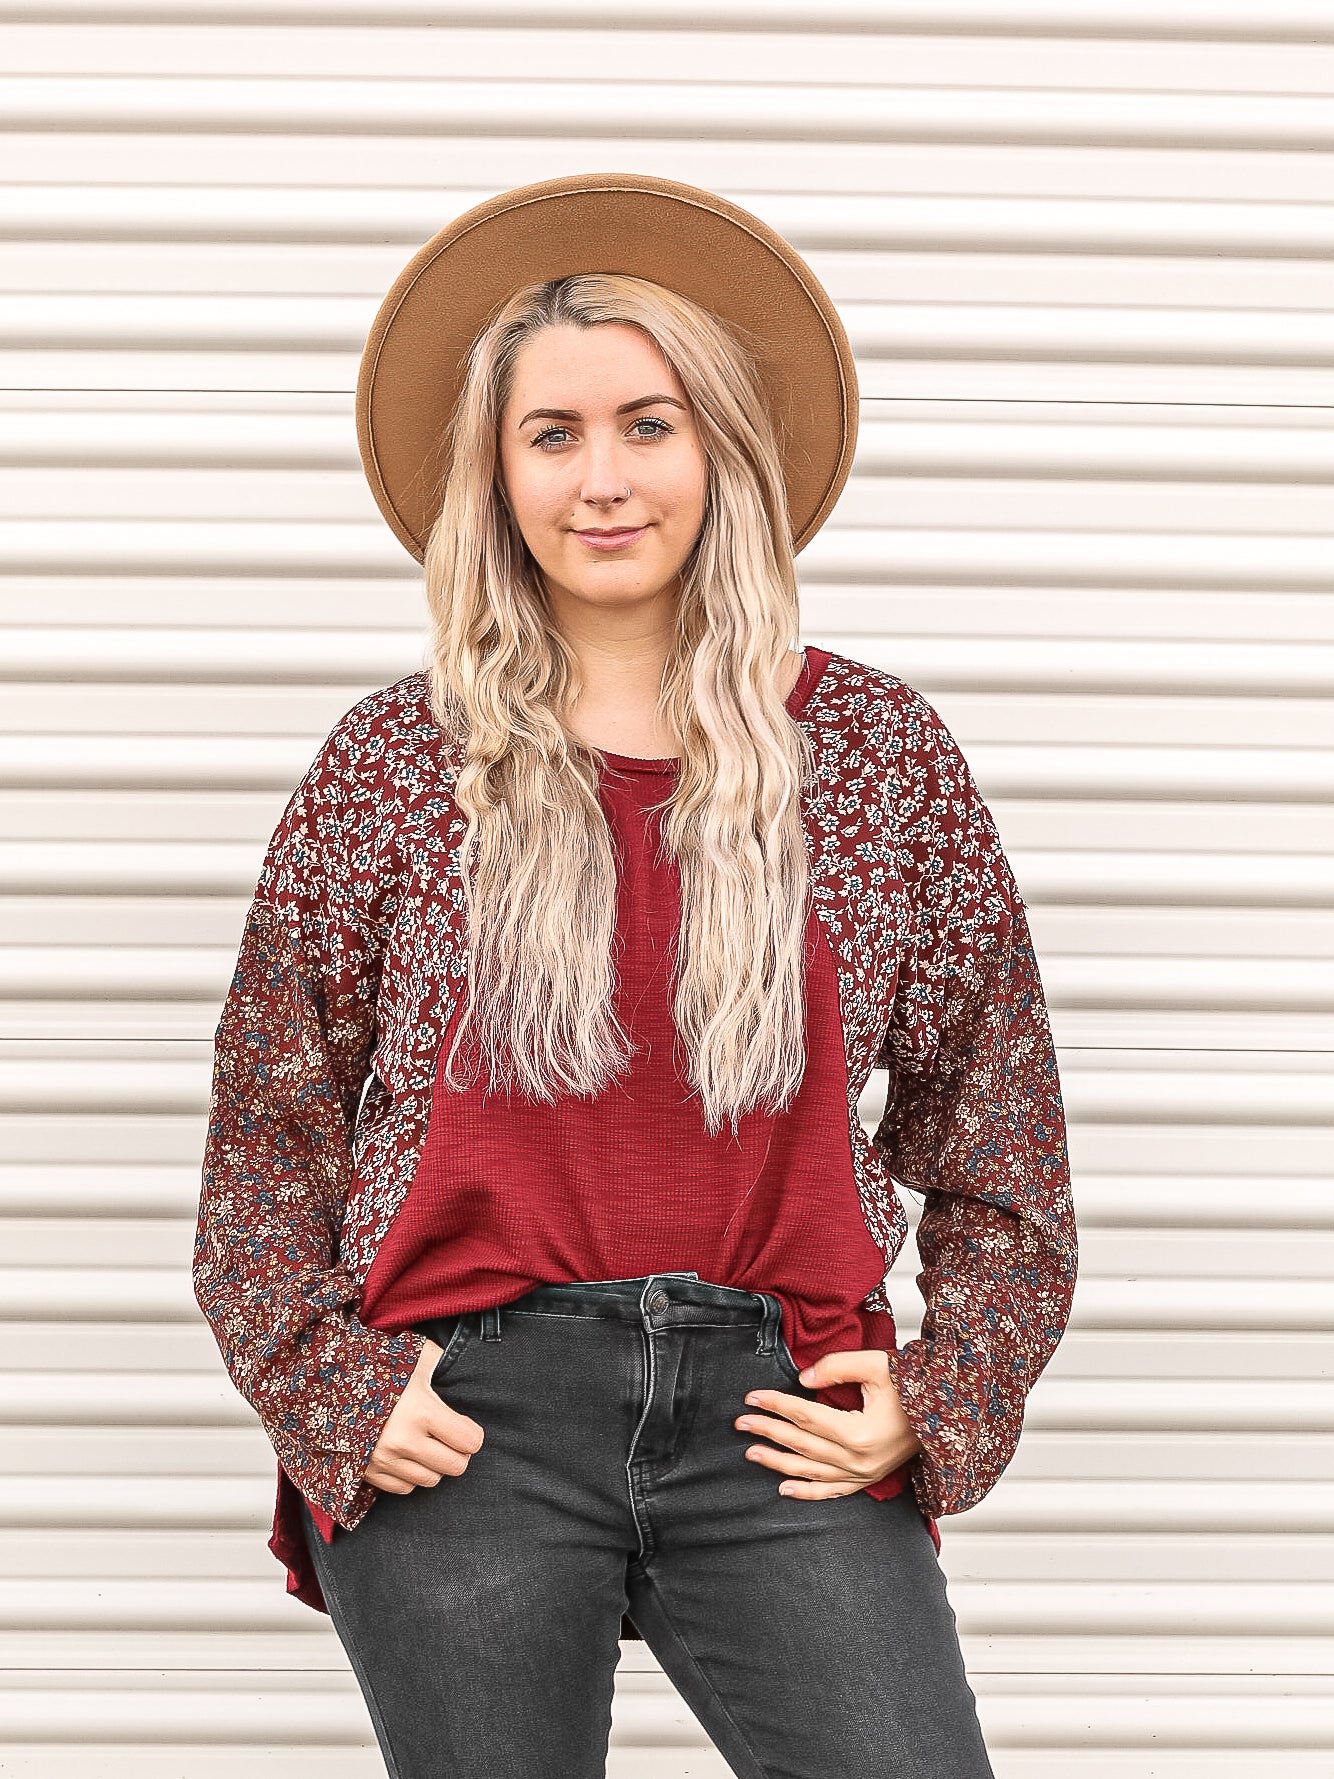 Deep red top with floral sleeves